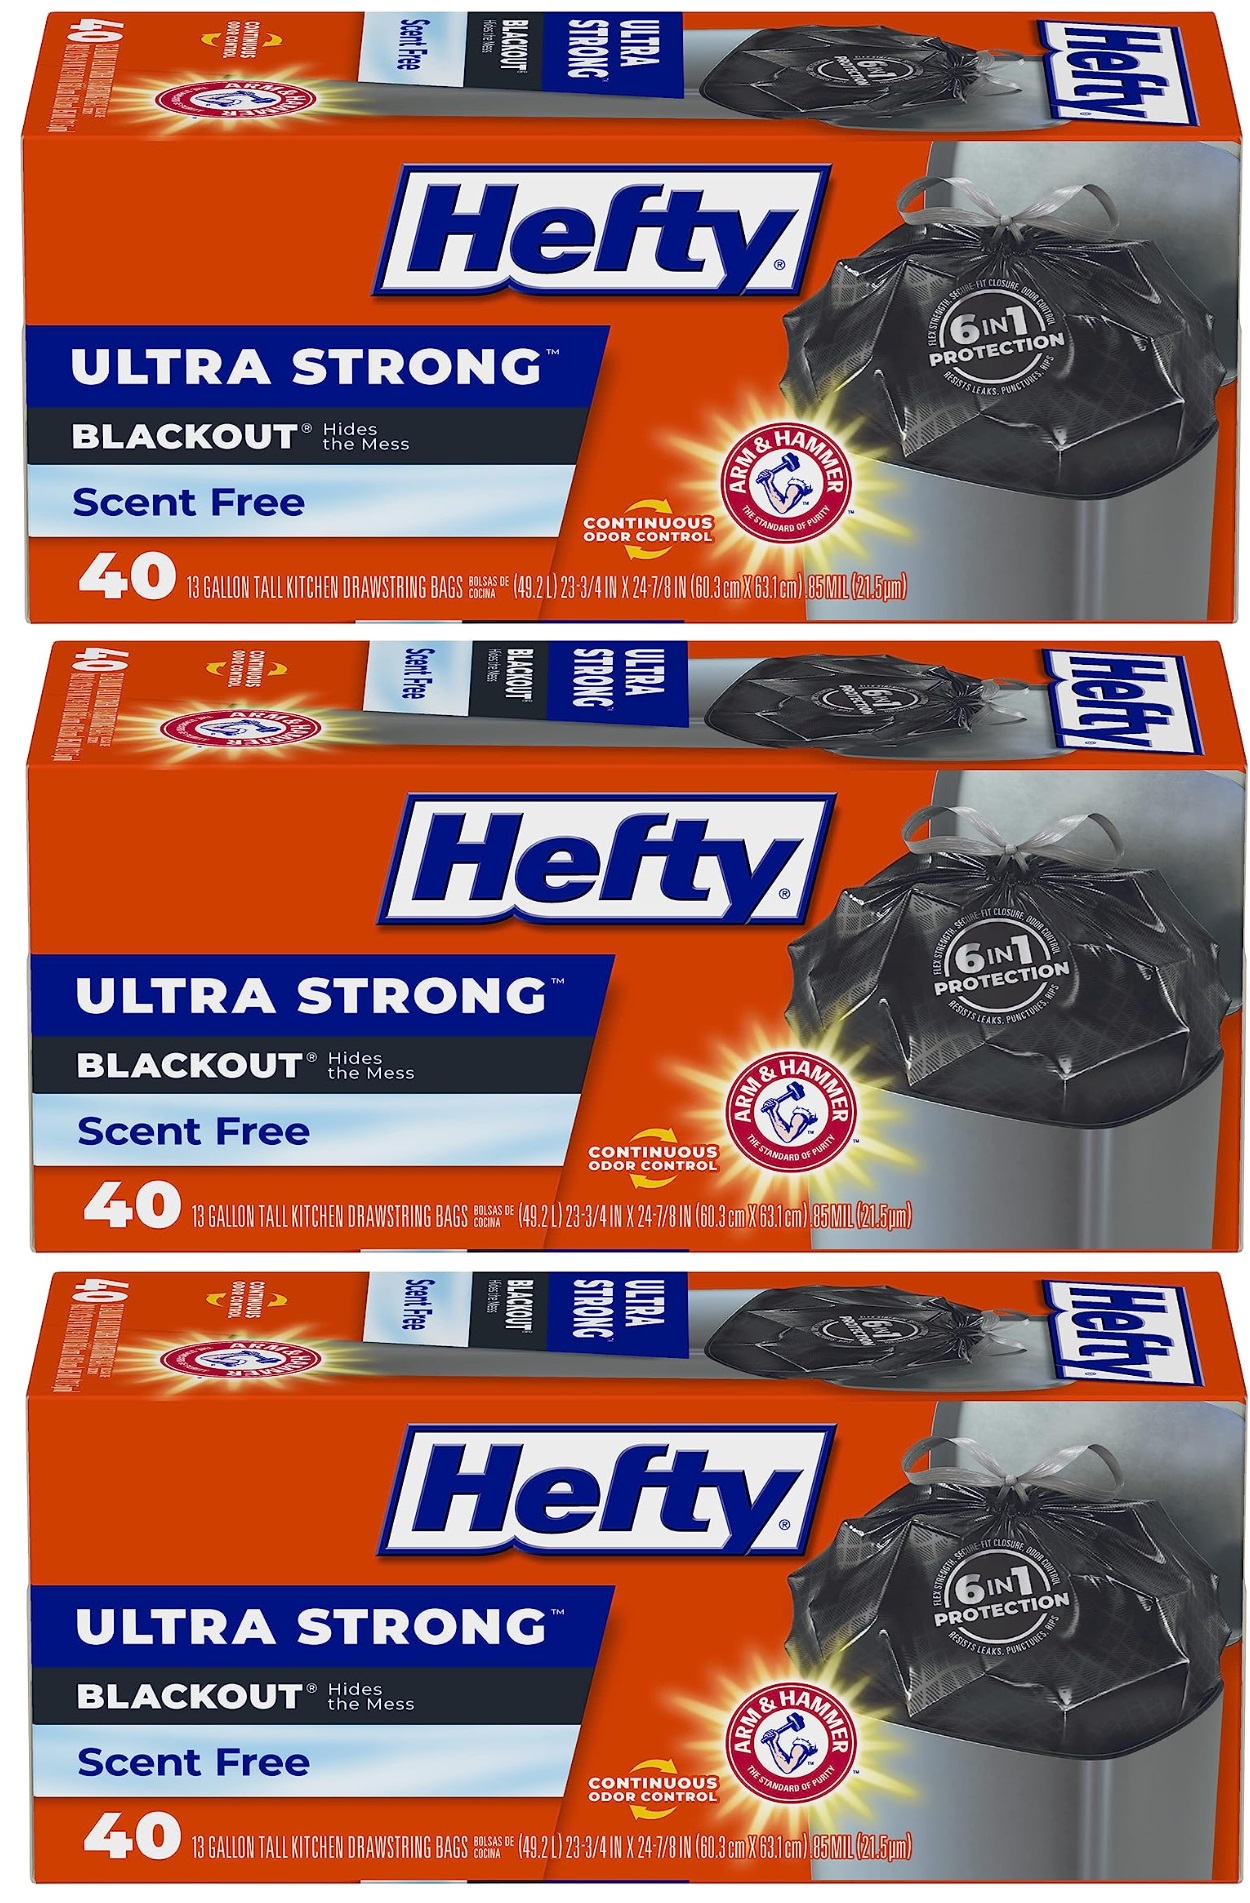 Hefty Ultra Strong Tall Kitchen Trash Bags, Blackout, Unscented, 13 Gallon, 40 Count $5.98